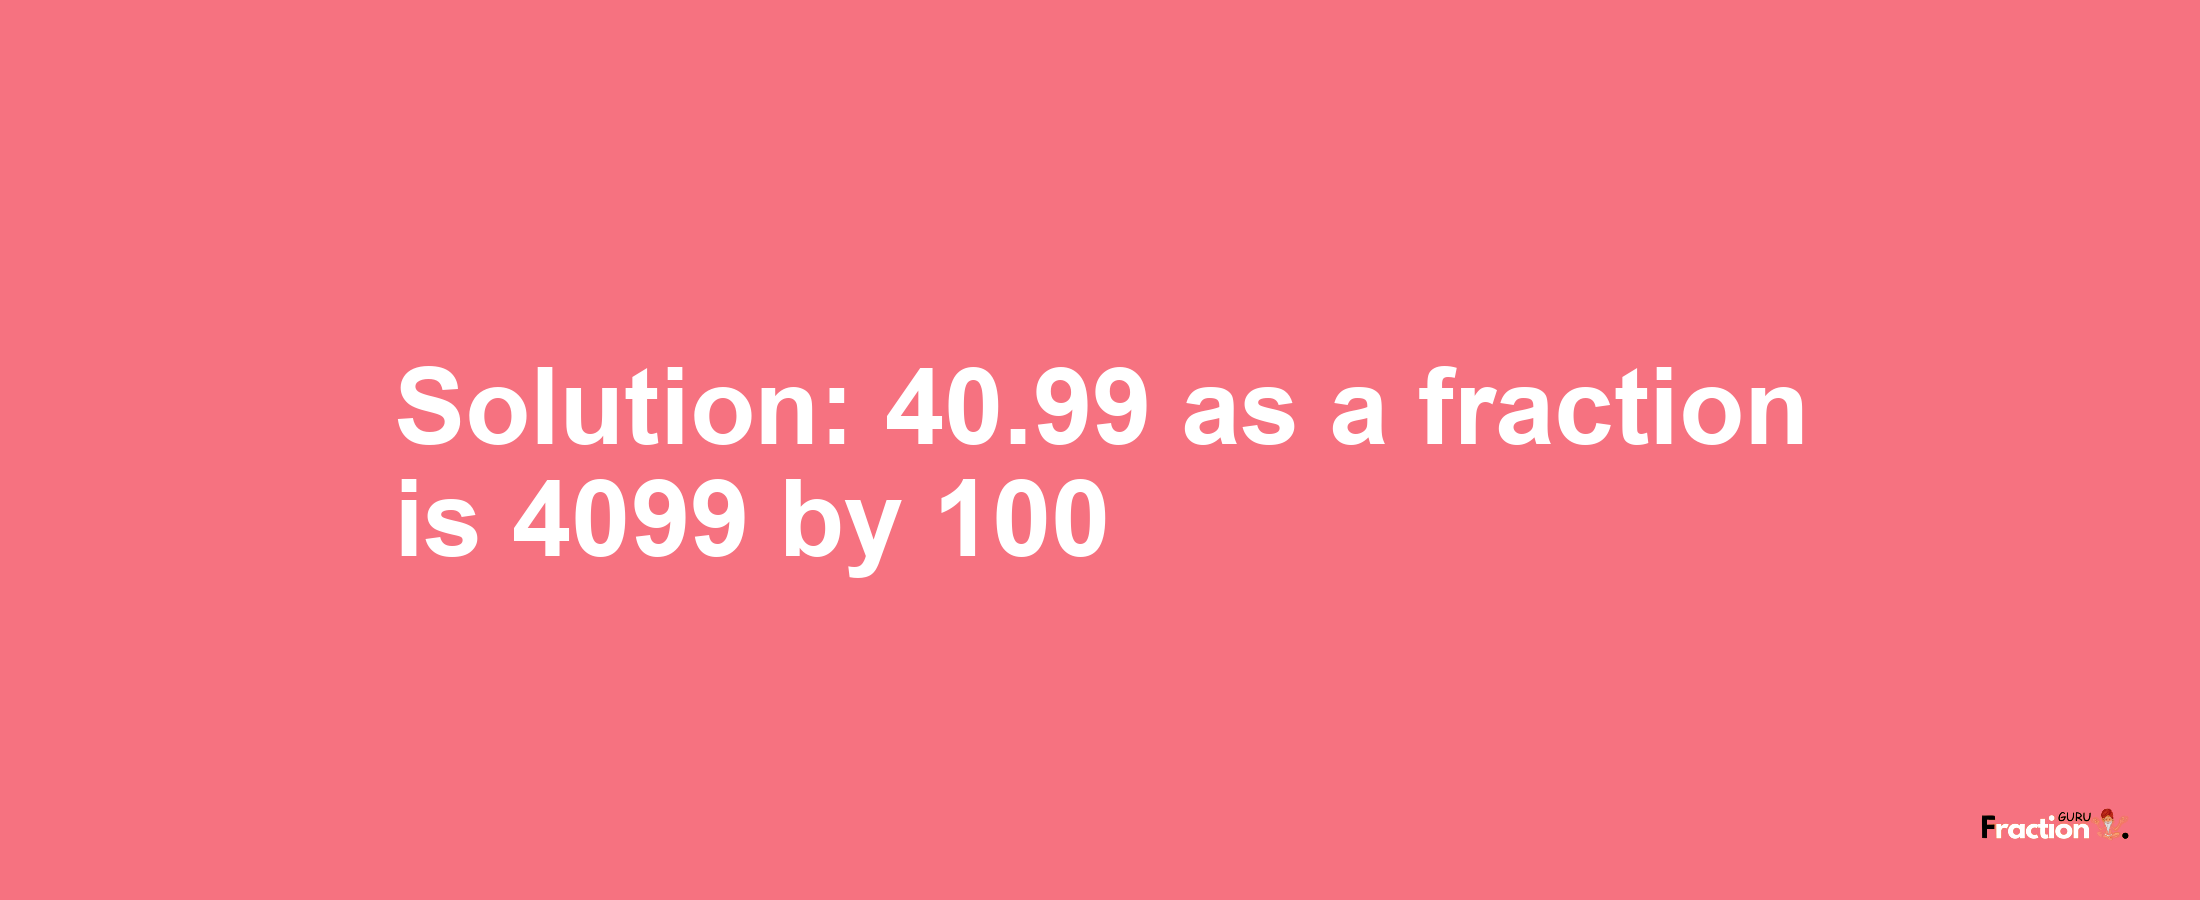 Solution:40.99 as a fraction is 4099/100